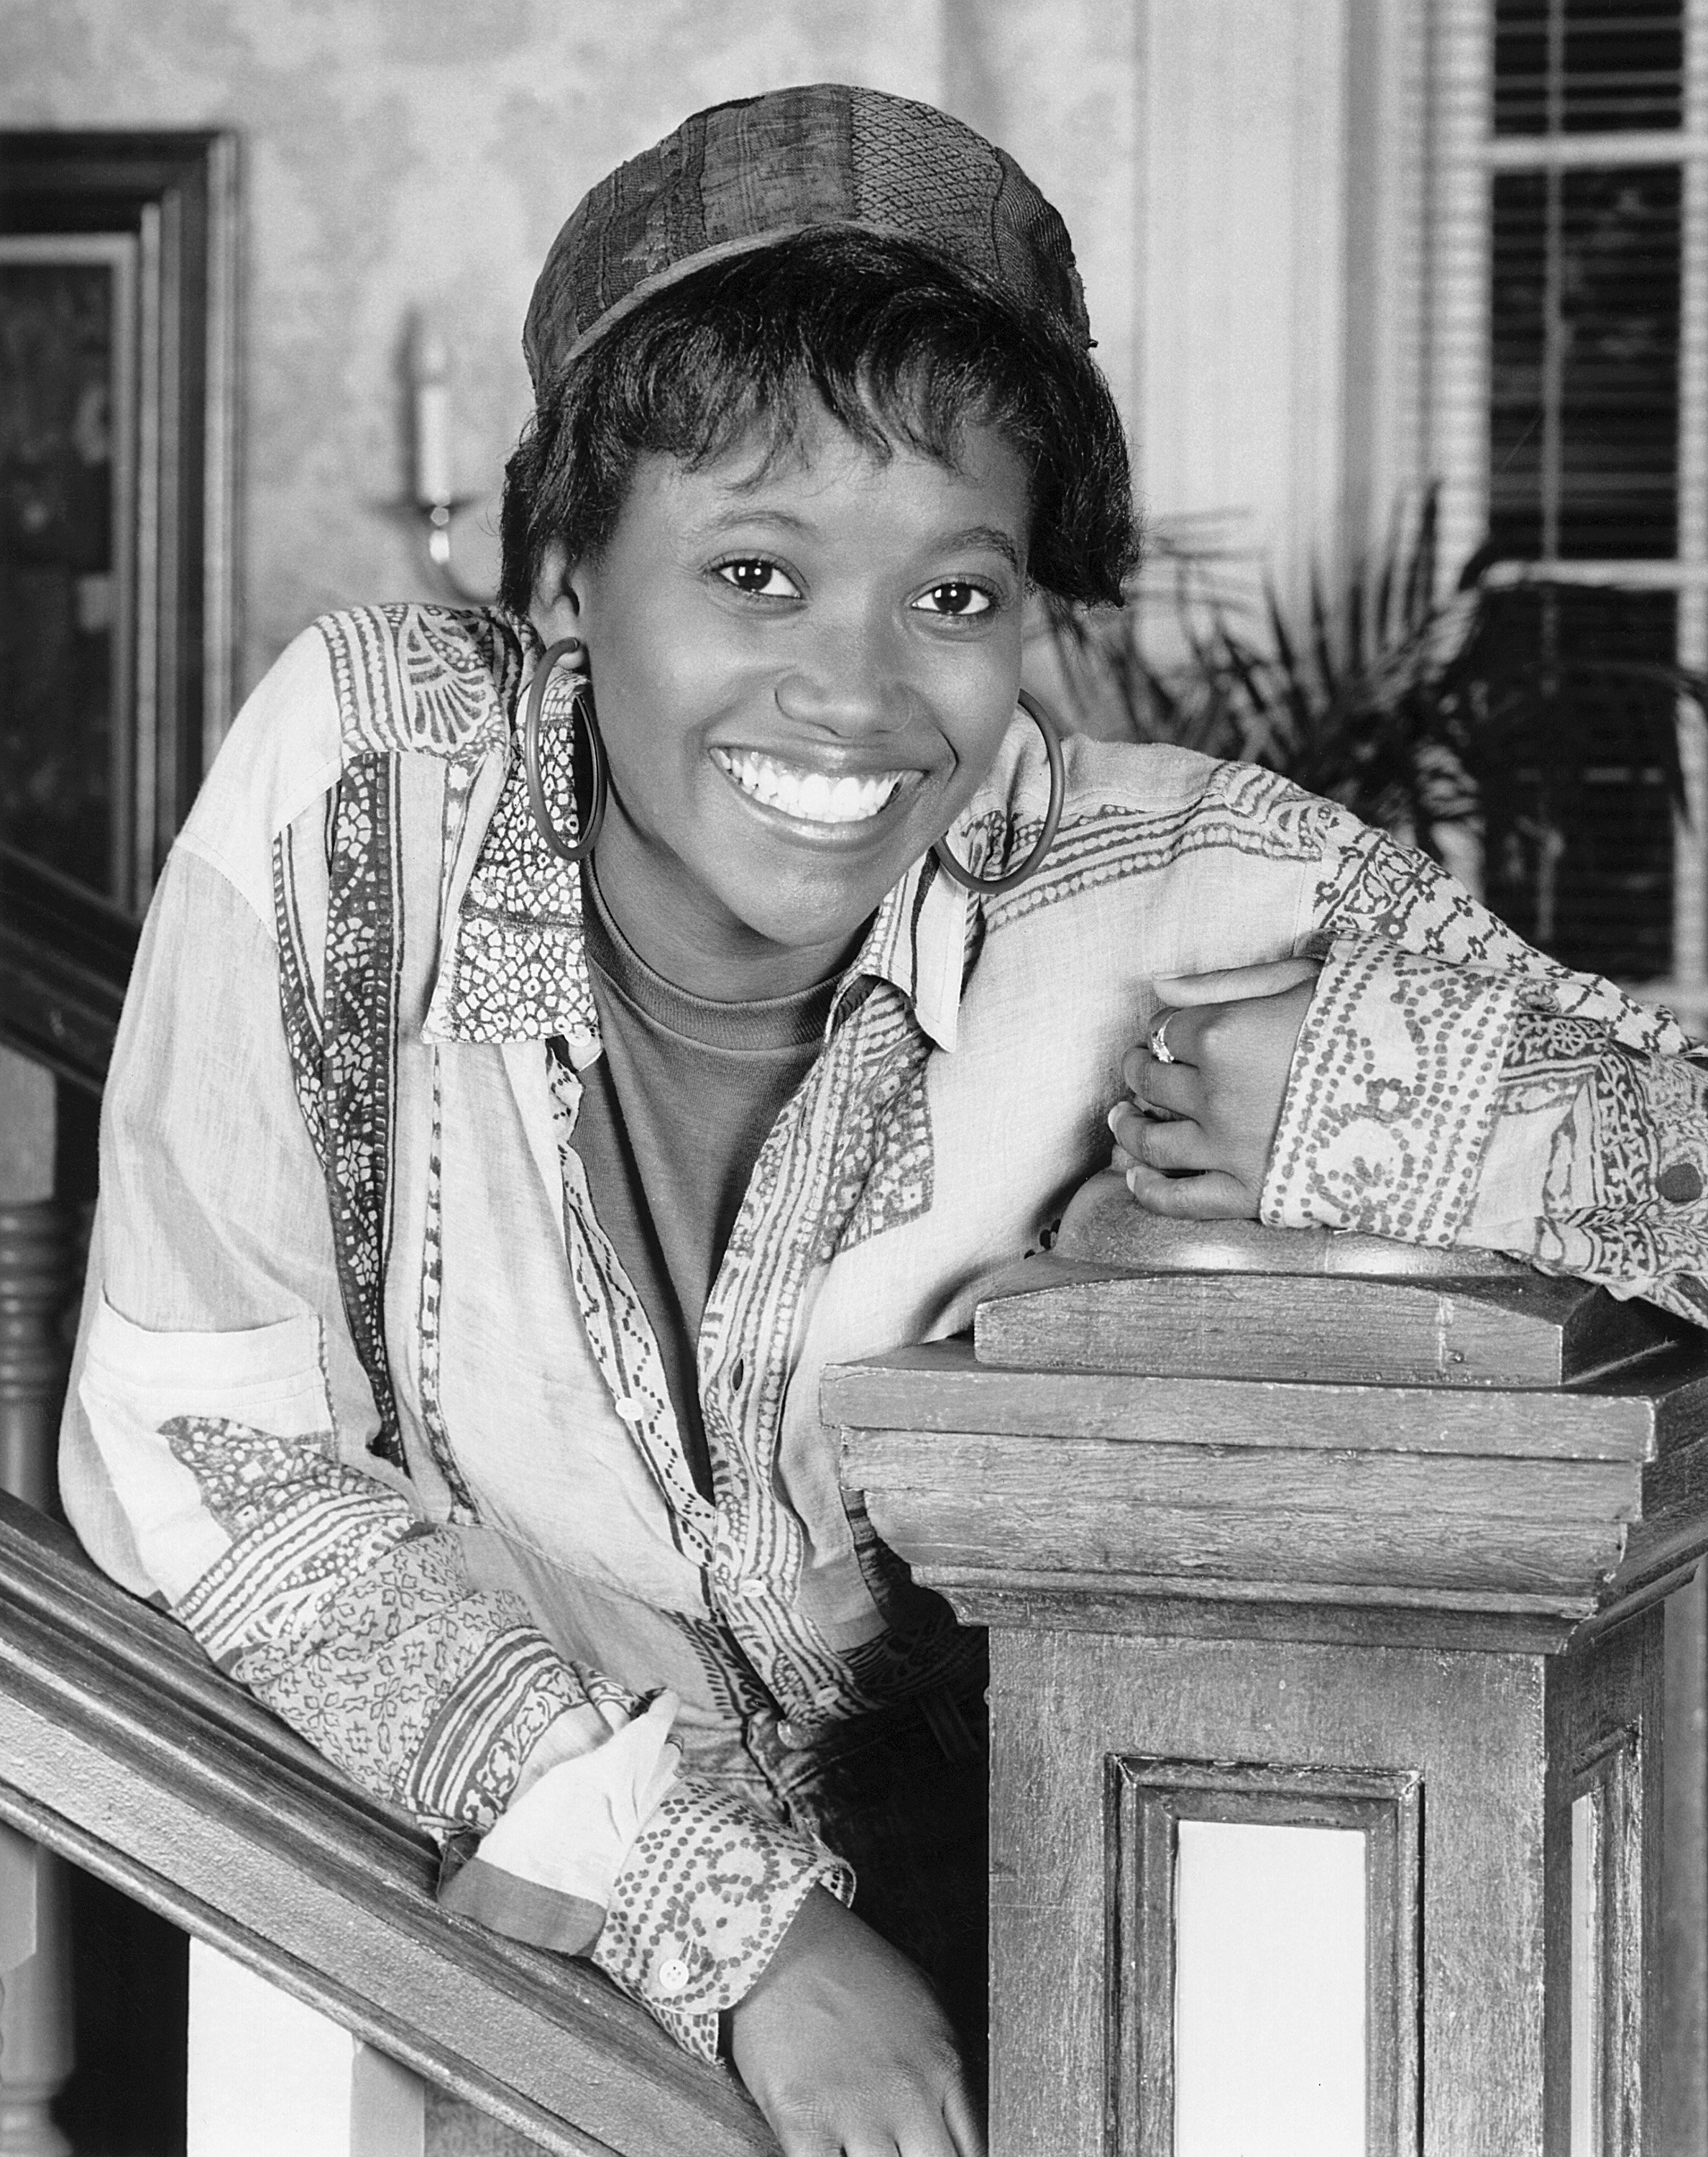 Erika Alexander as Pam Tucker on "The Cosby Show" | Photo: Getty Images